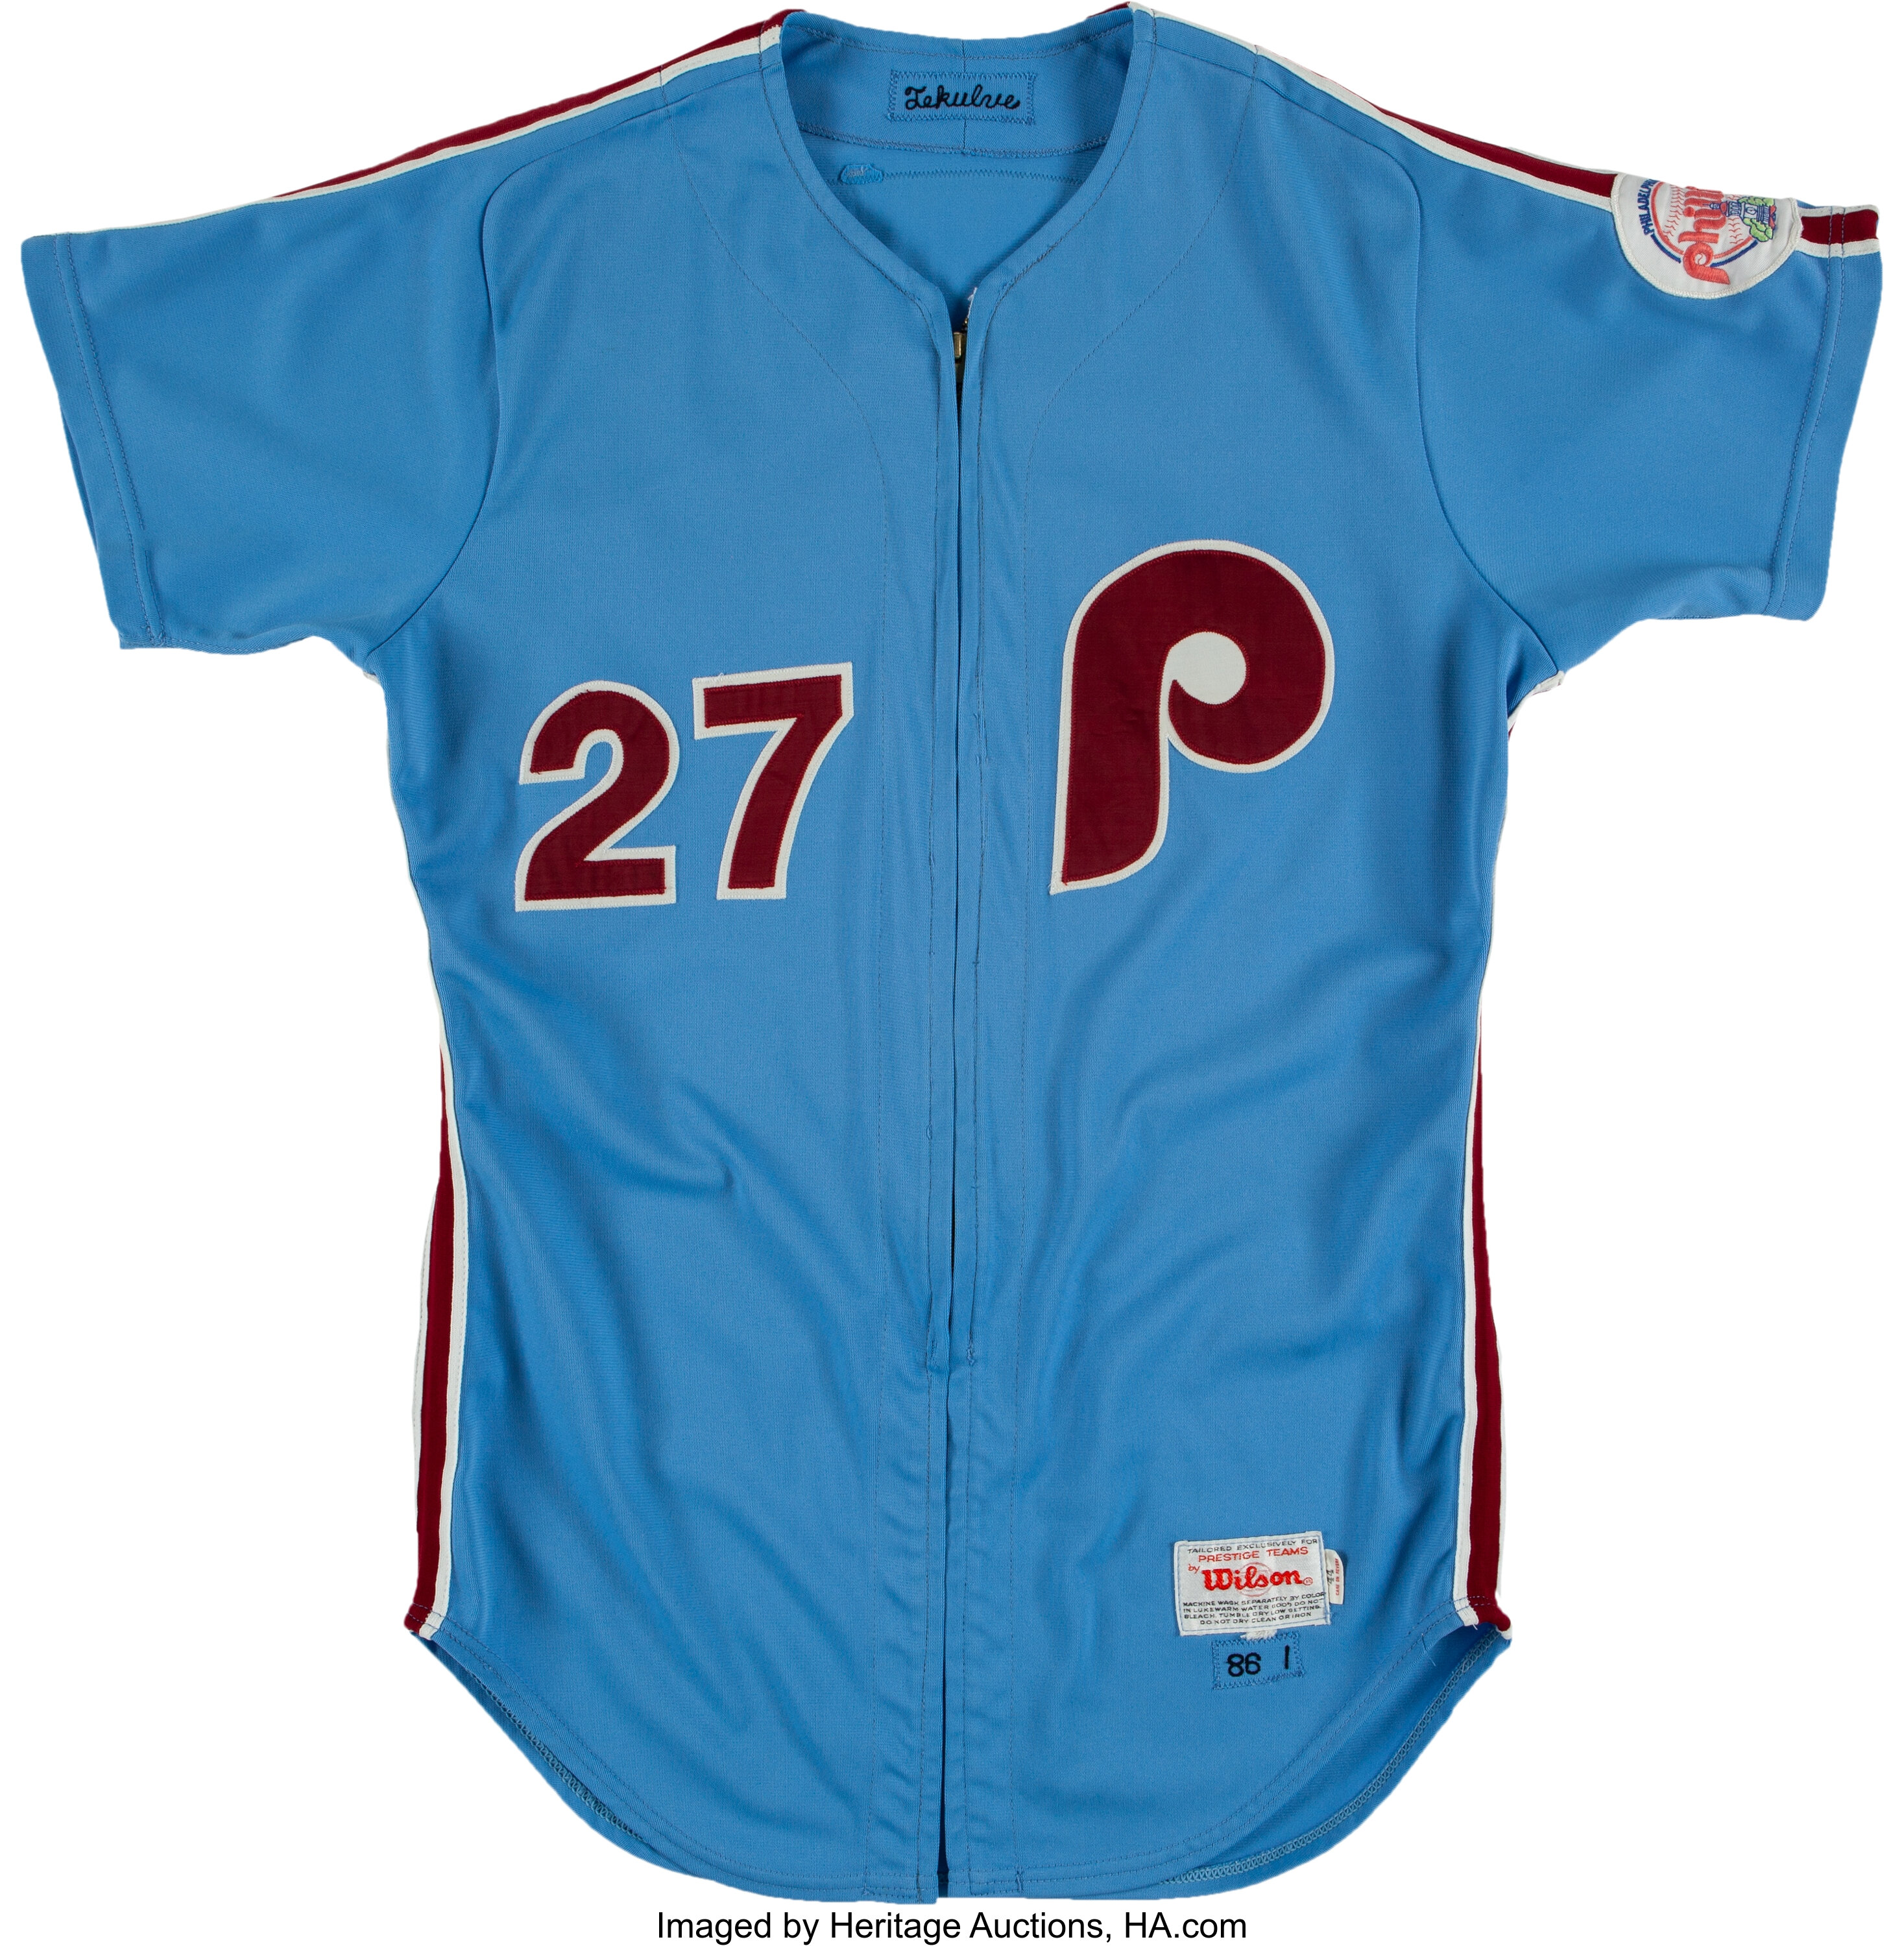 An extremely rare, game-worn Phillies jersey is up for sale